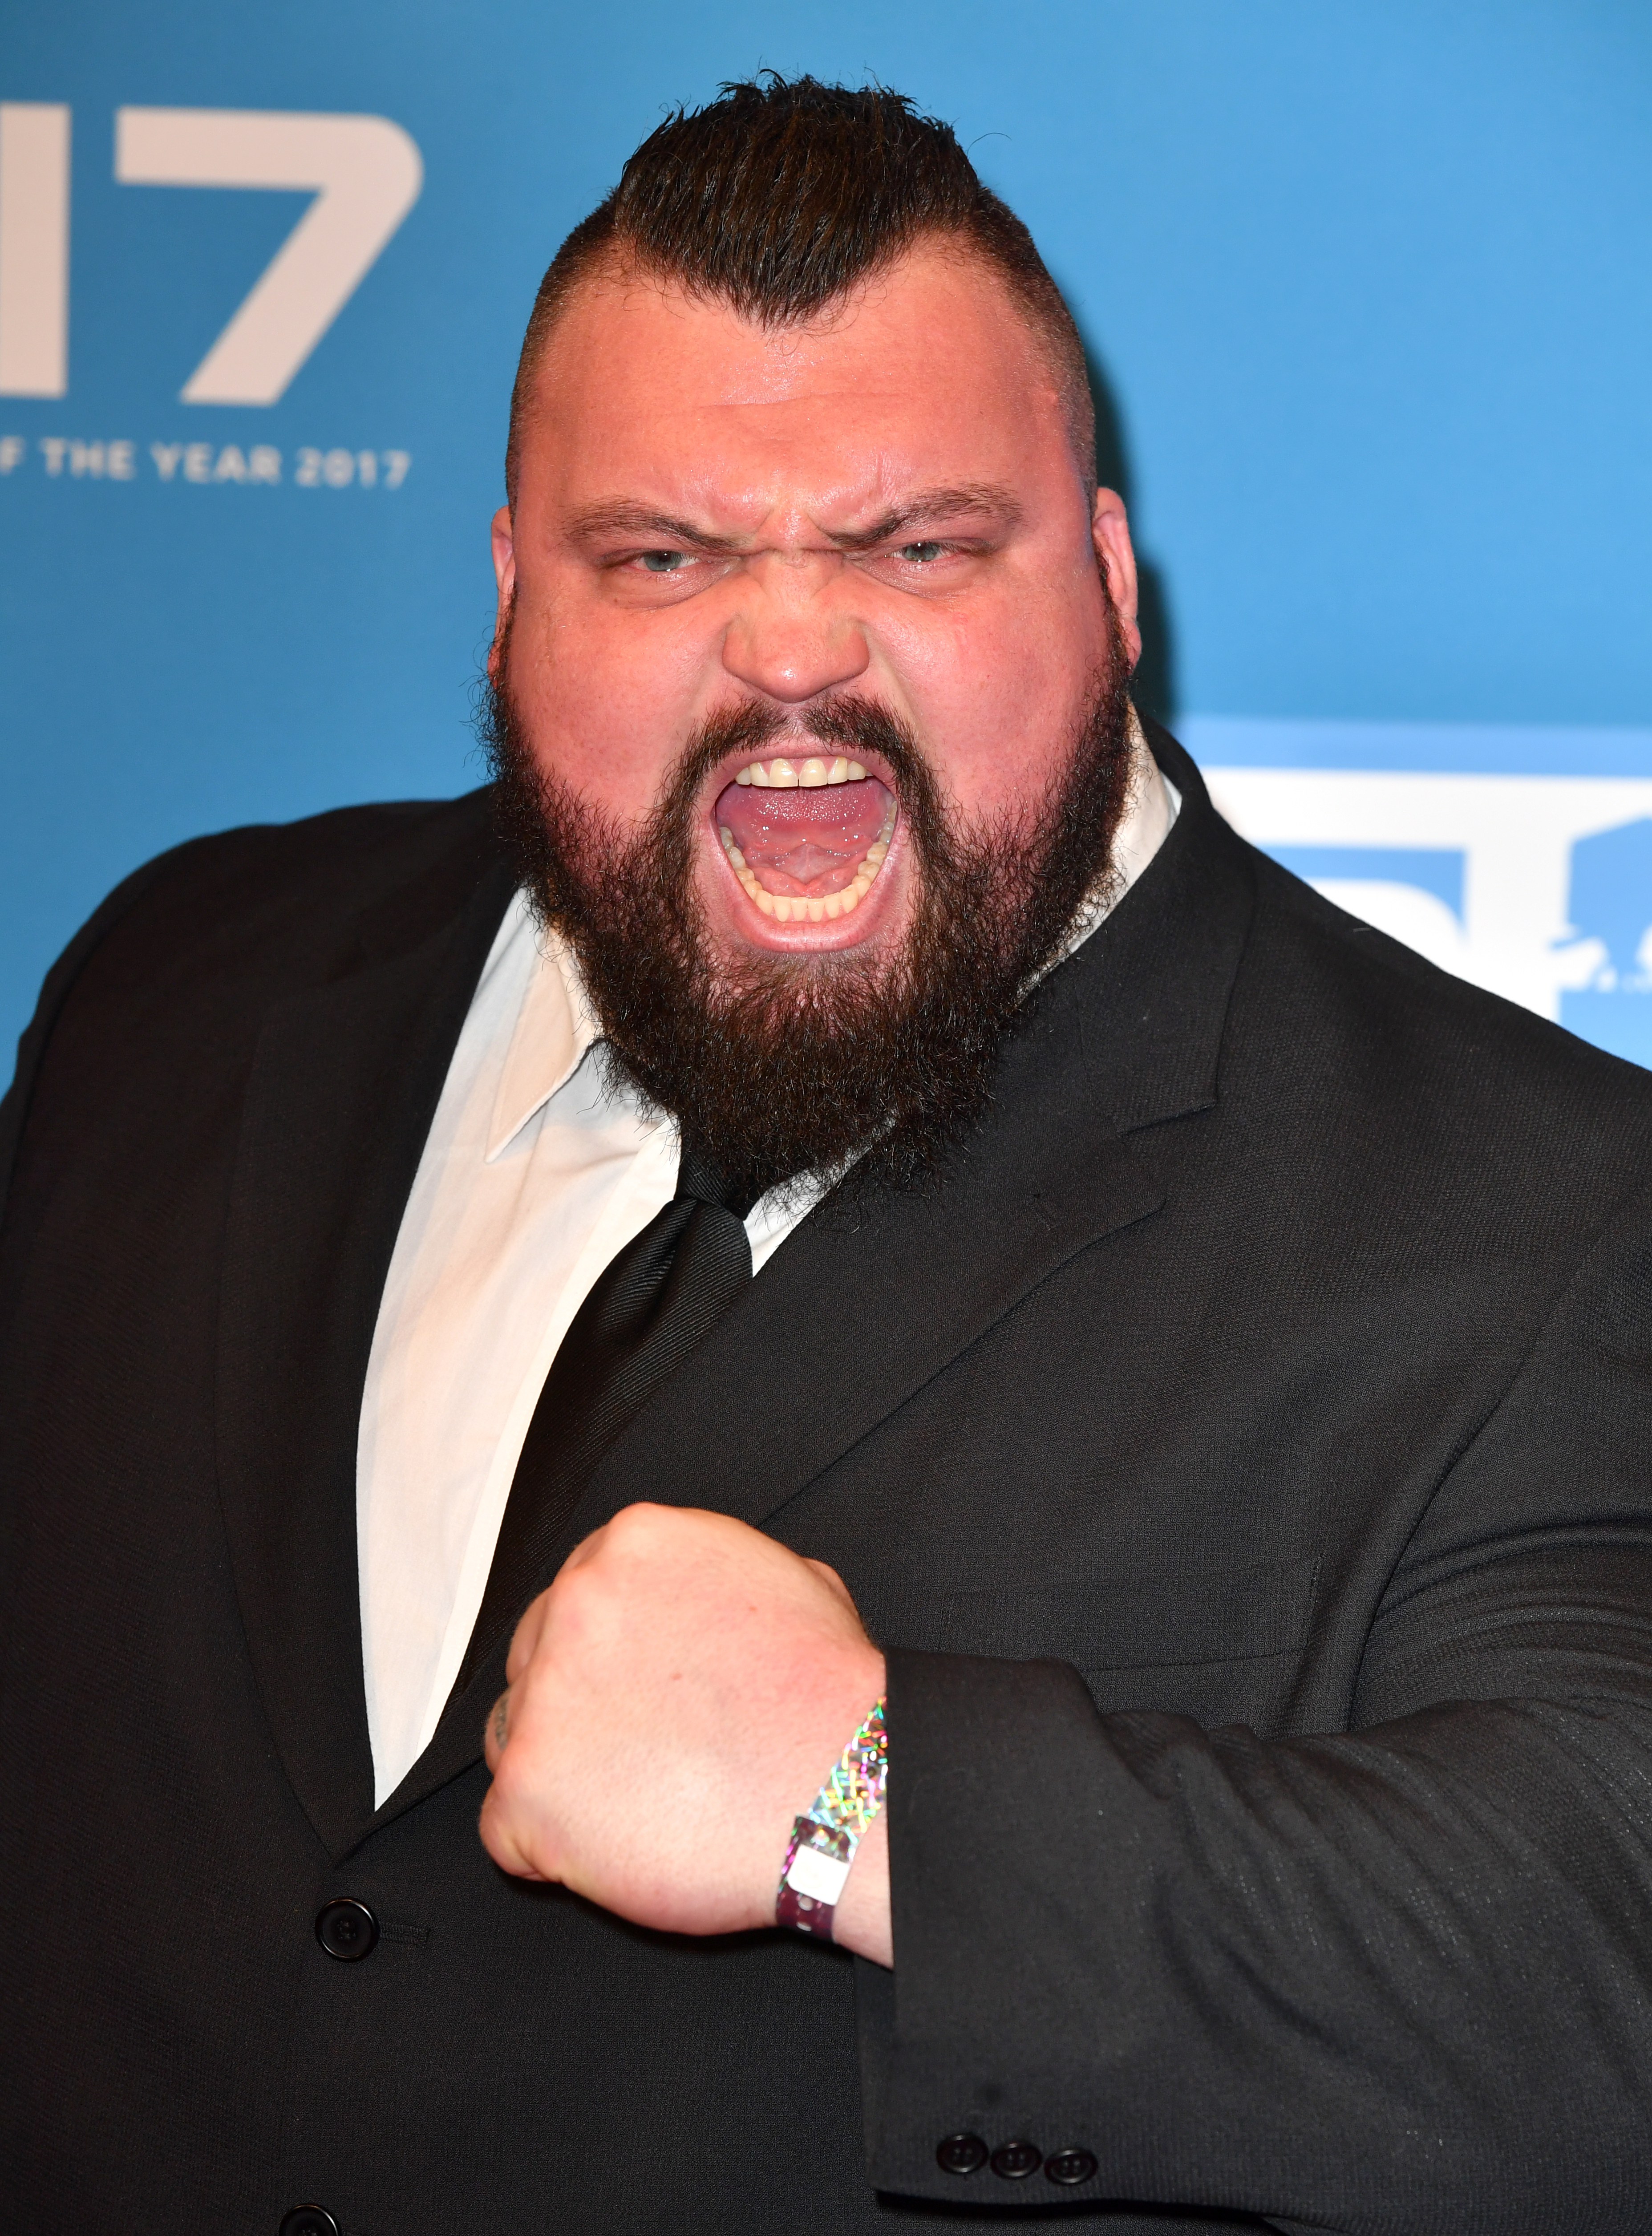 Eddie Hall Reveals The Worst Injury He Has Ever Suffered